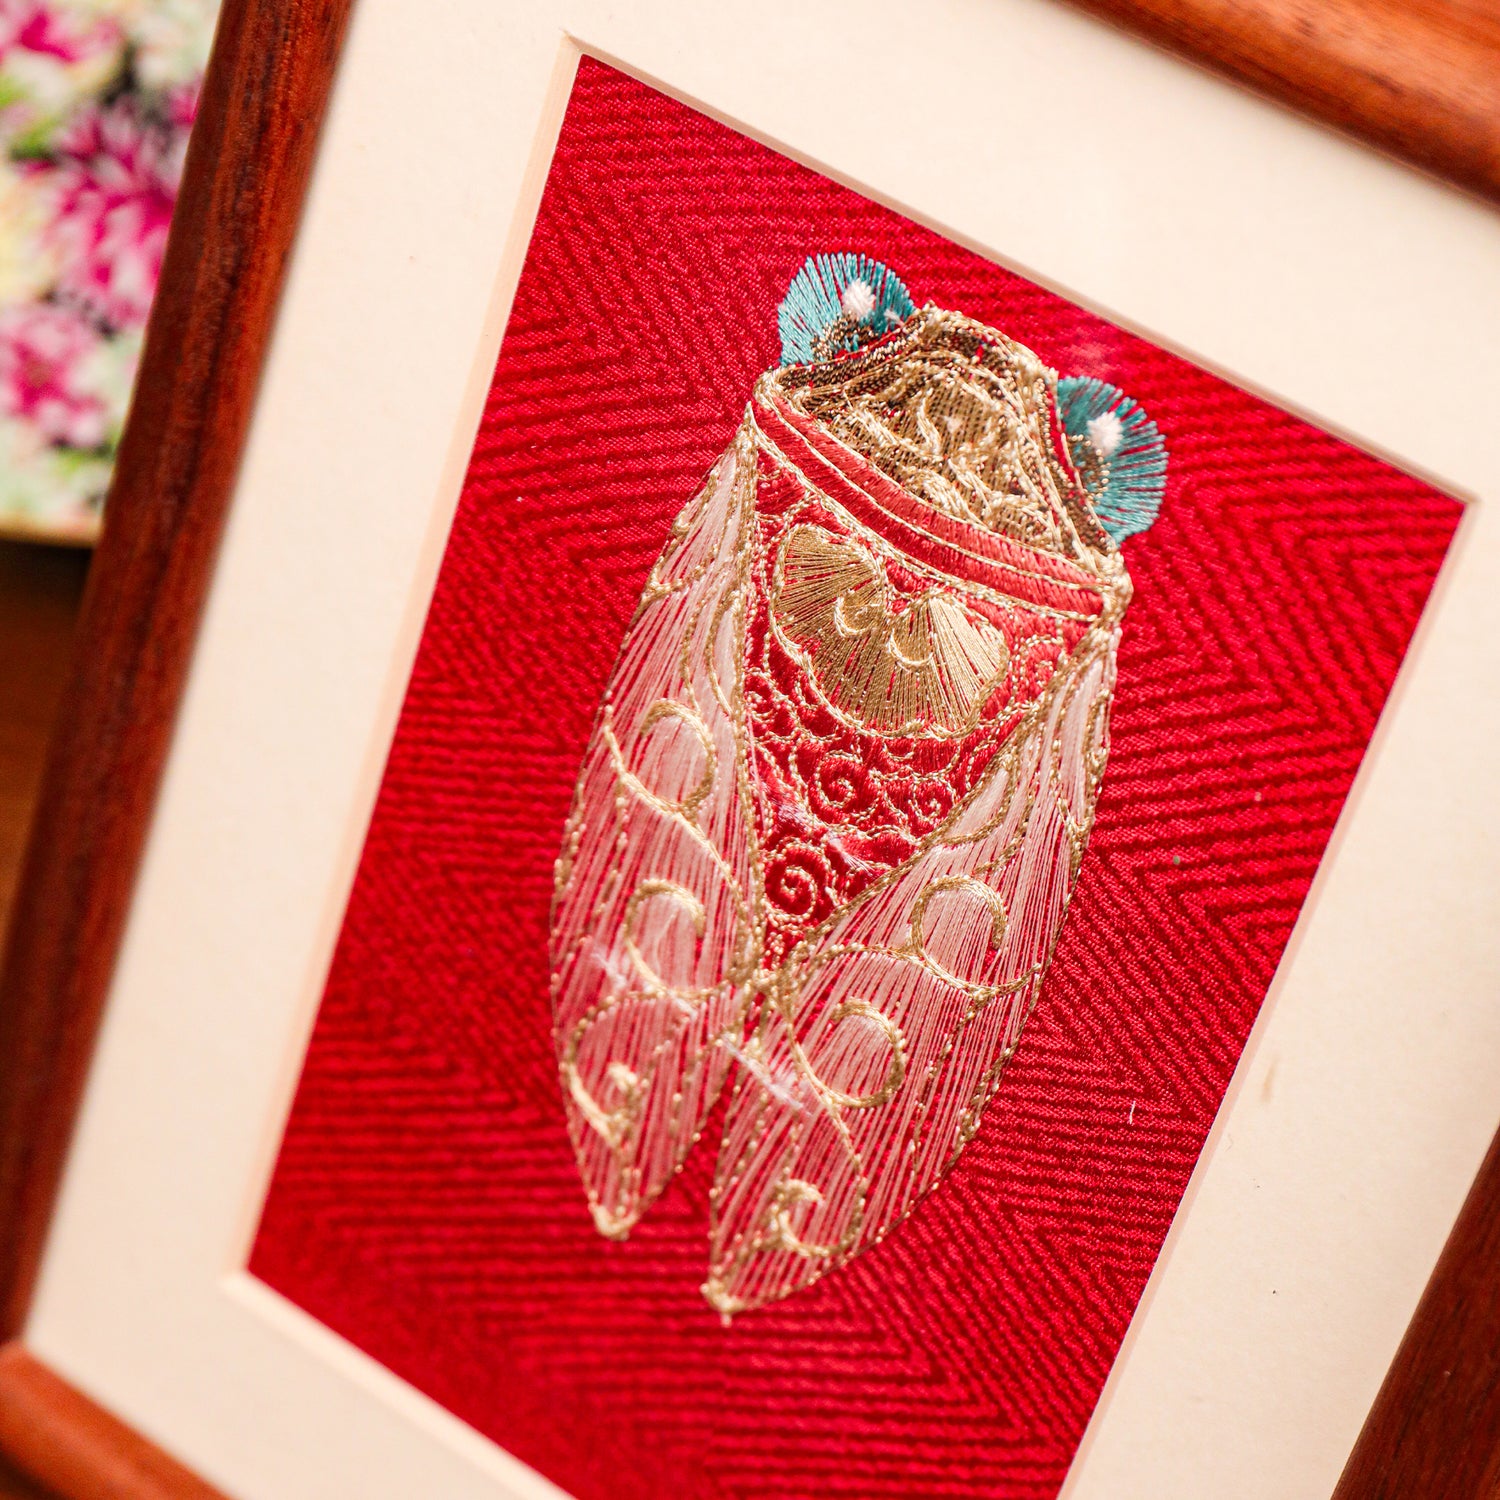 The golden threads details effect is highlighted in the close shot of Golden cicada seed embroidery artwork.